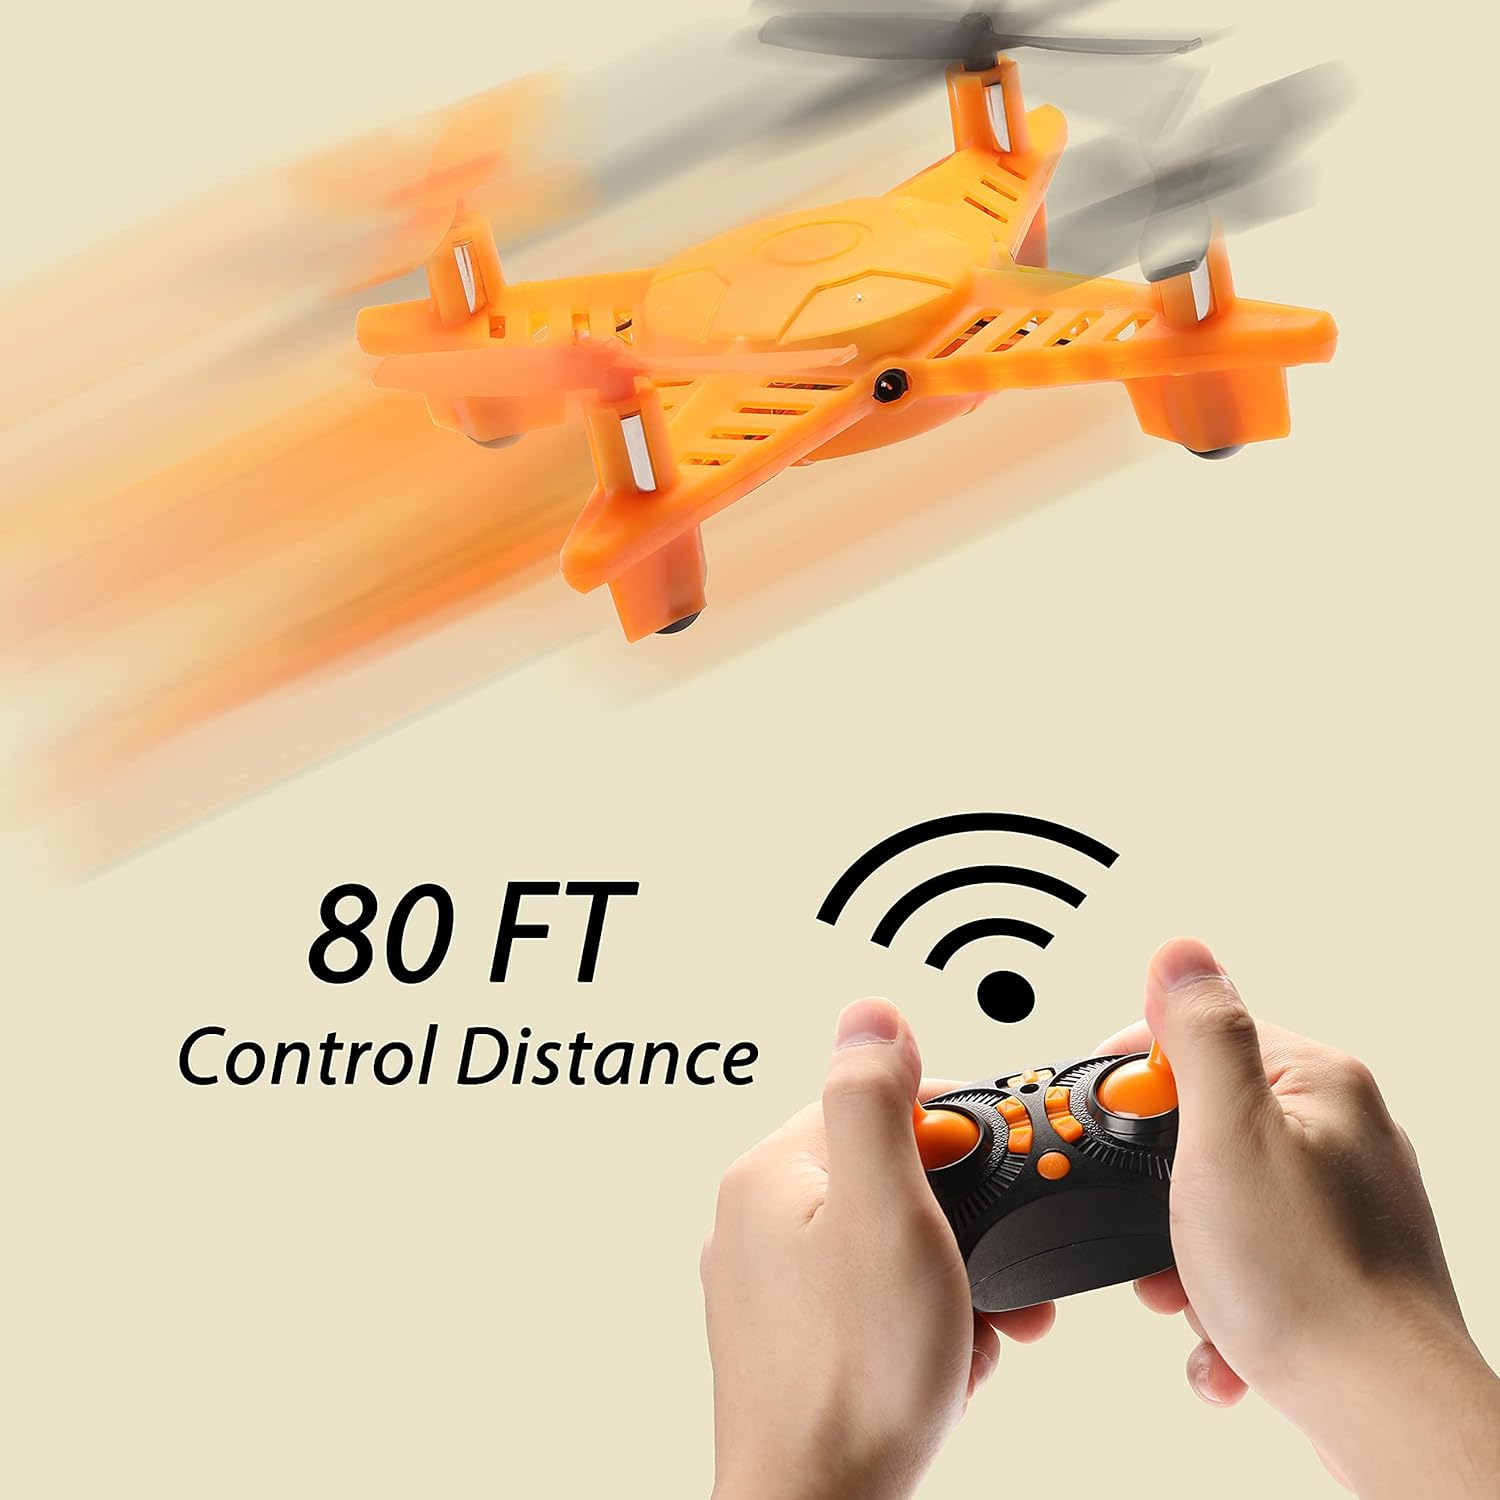 SainSmart Jr. Mini Drone Kit STEM Remote Control Quadcopter, RC Helicopter, Altitude Hold, DIY Headless Mode for Kids Adults